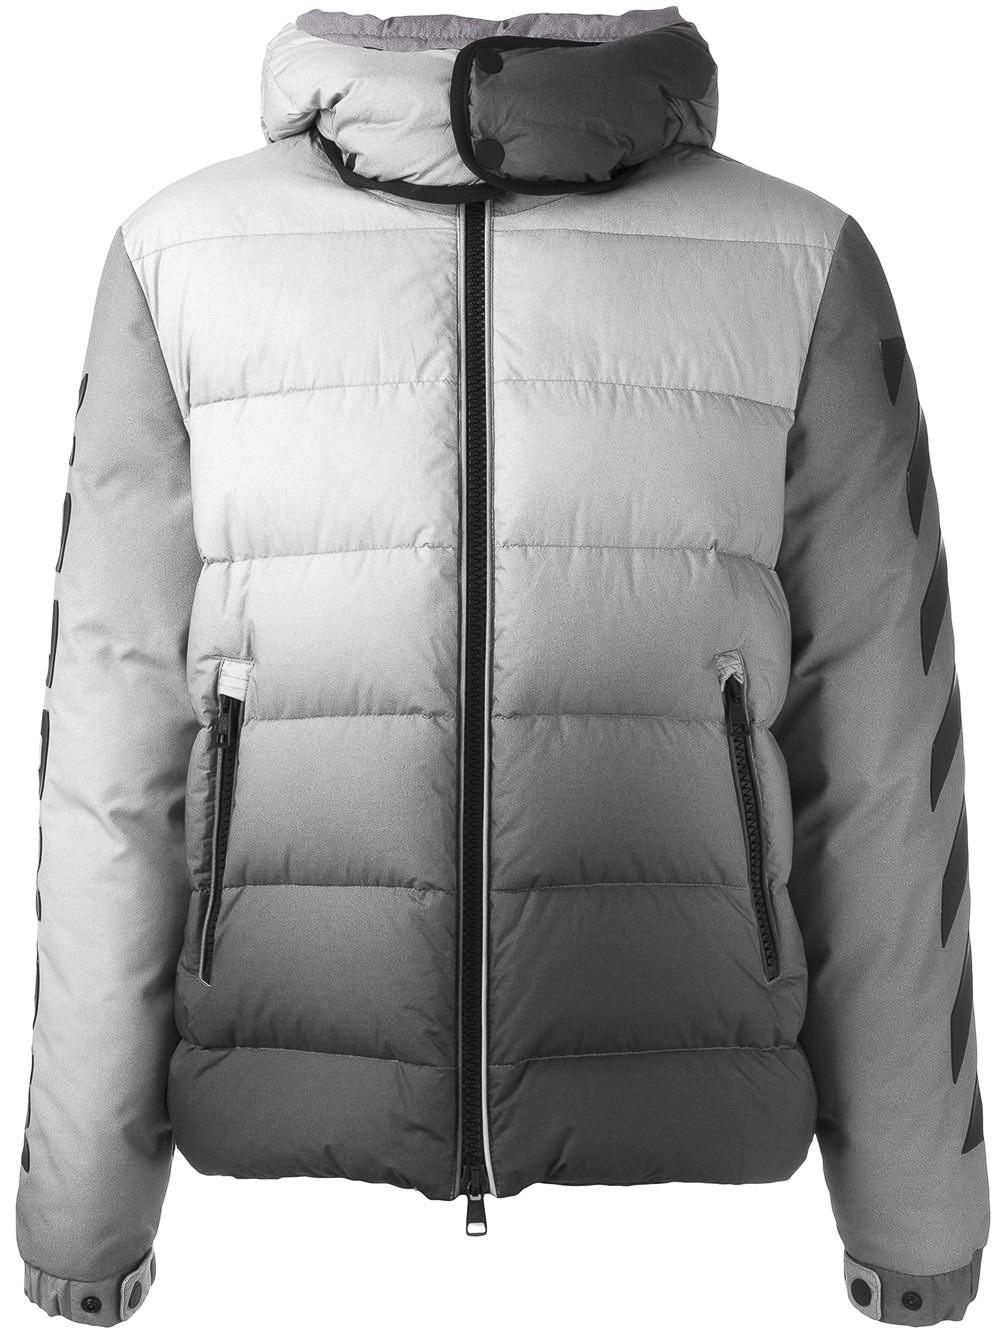 Moncler Cotton X Off-white 'enclos' Padded Jacket in Blue for Men - Lyst